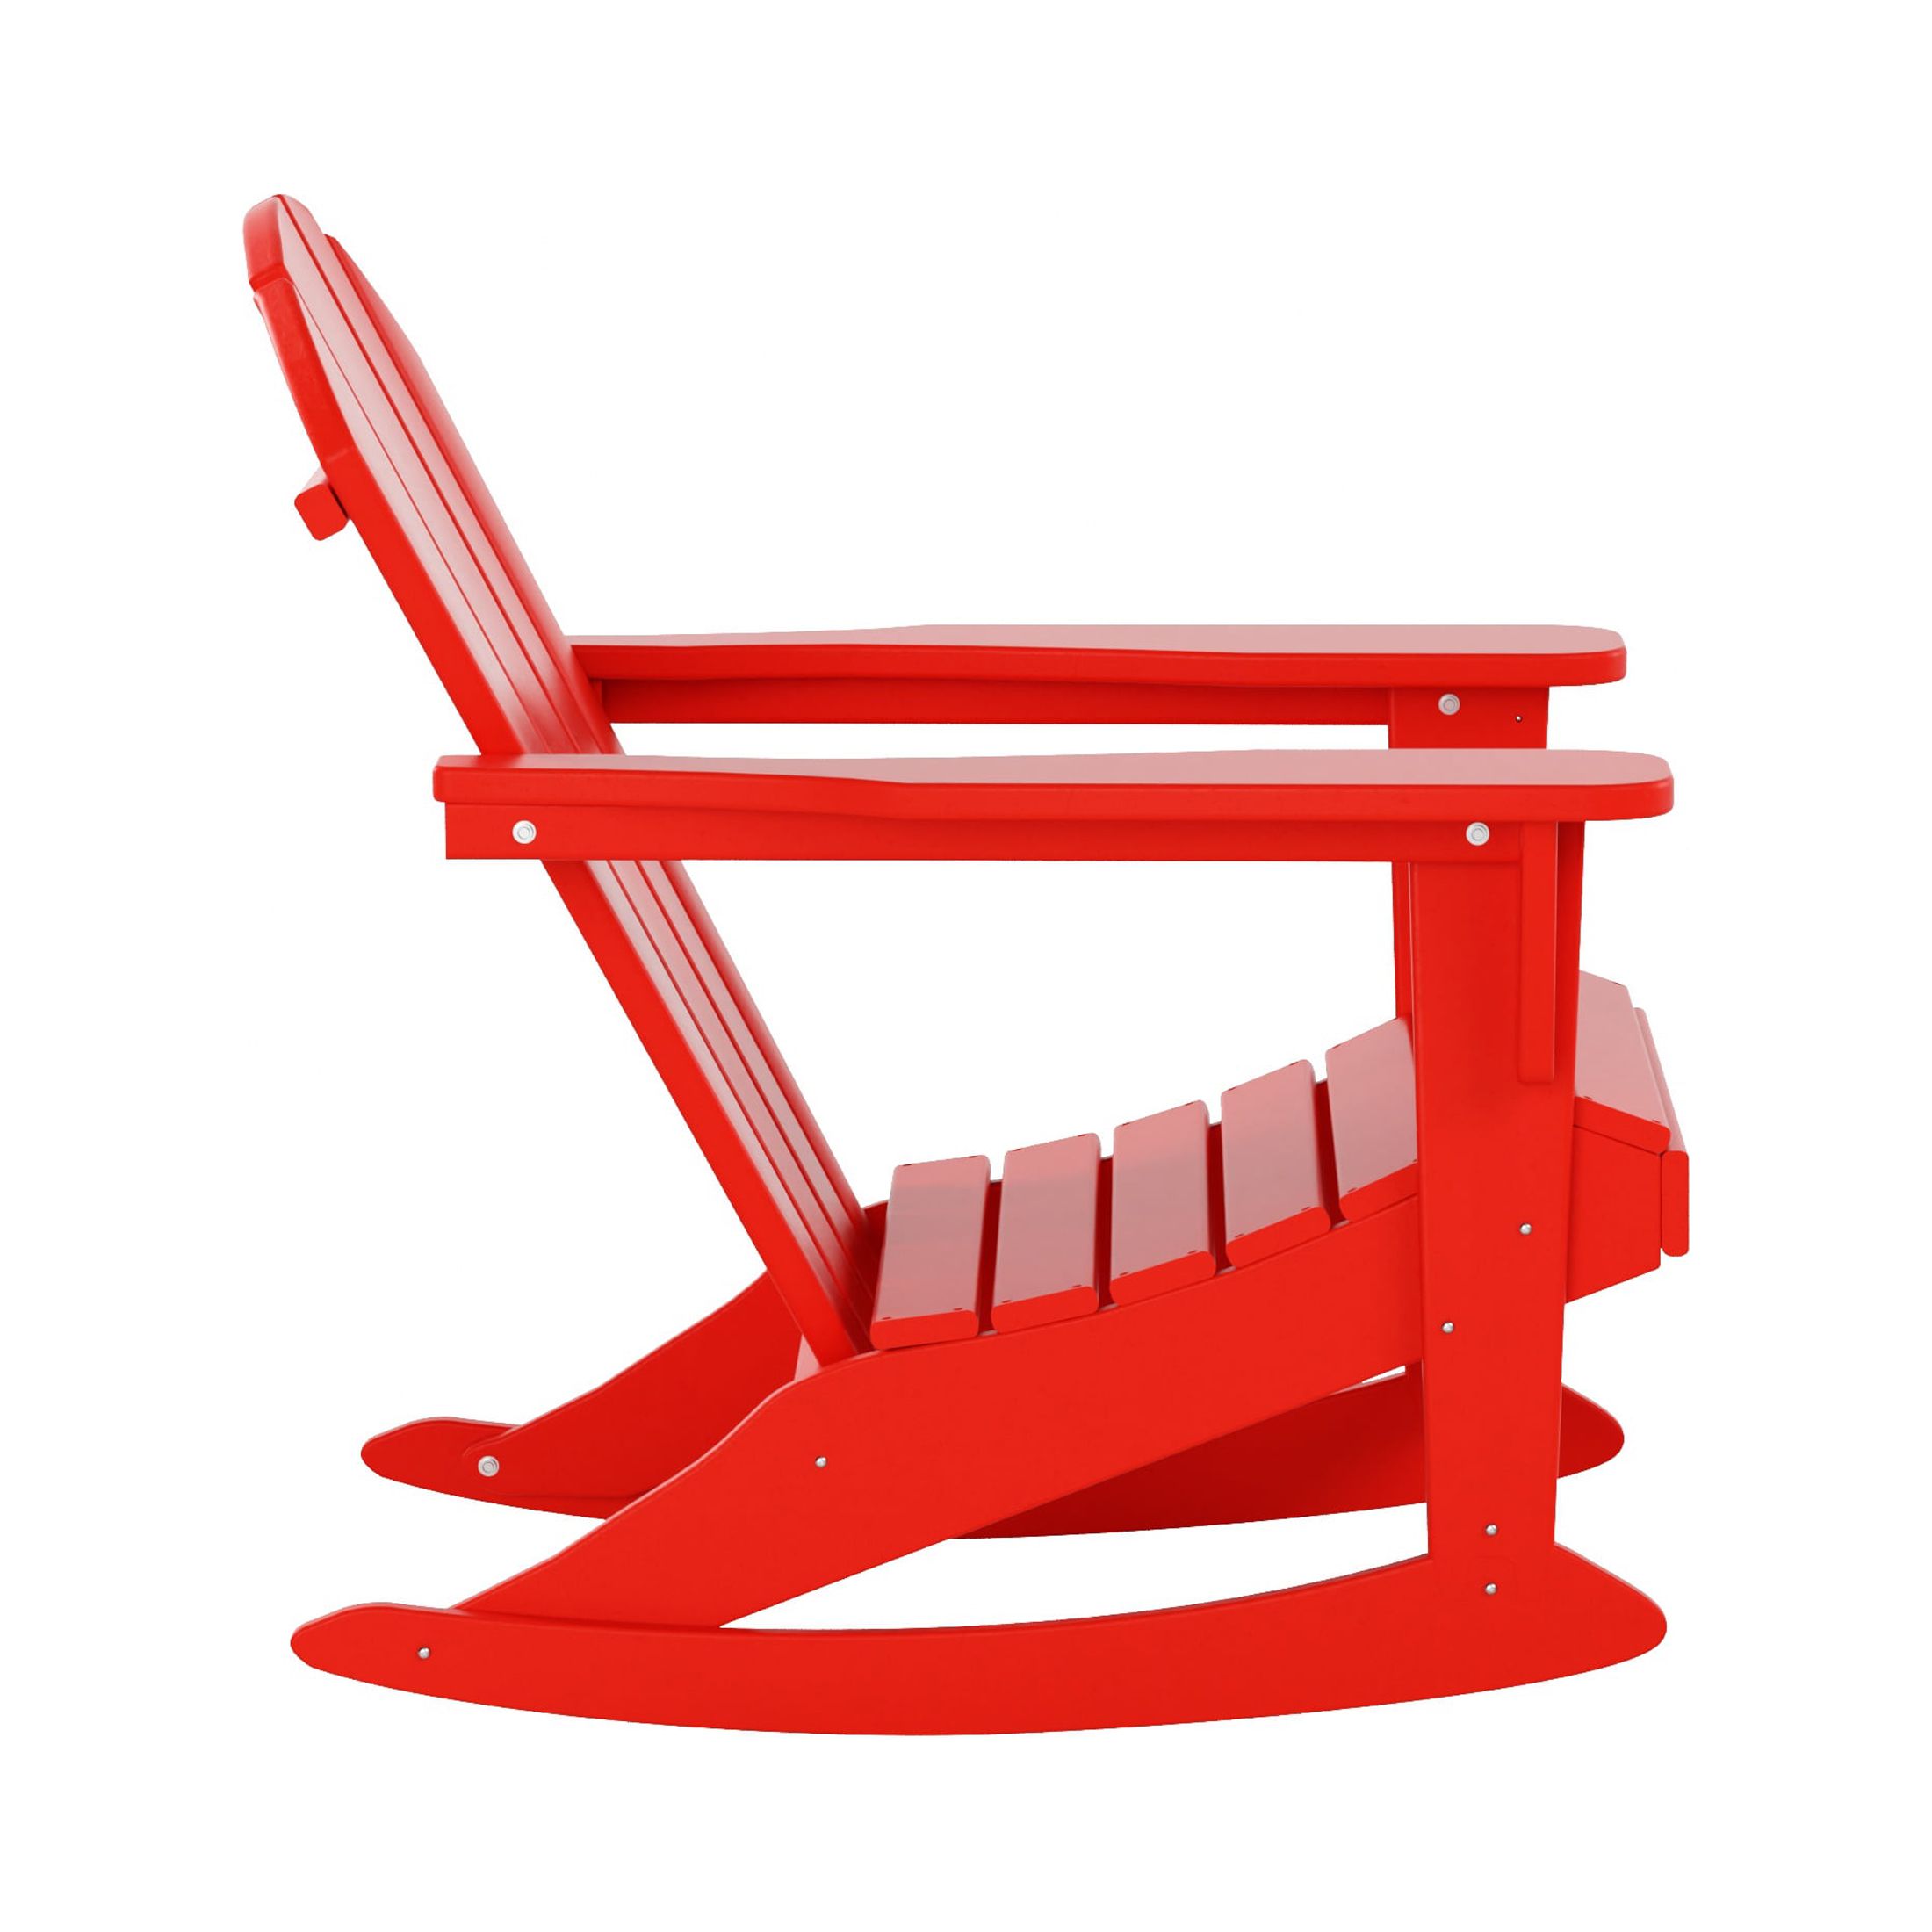 GARDEN 2-Piece Set Plastic Outdoor Rocking Chair with Square Side Table Included, Red - image 5 of 11